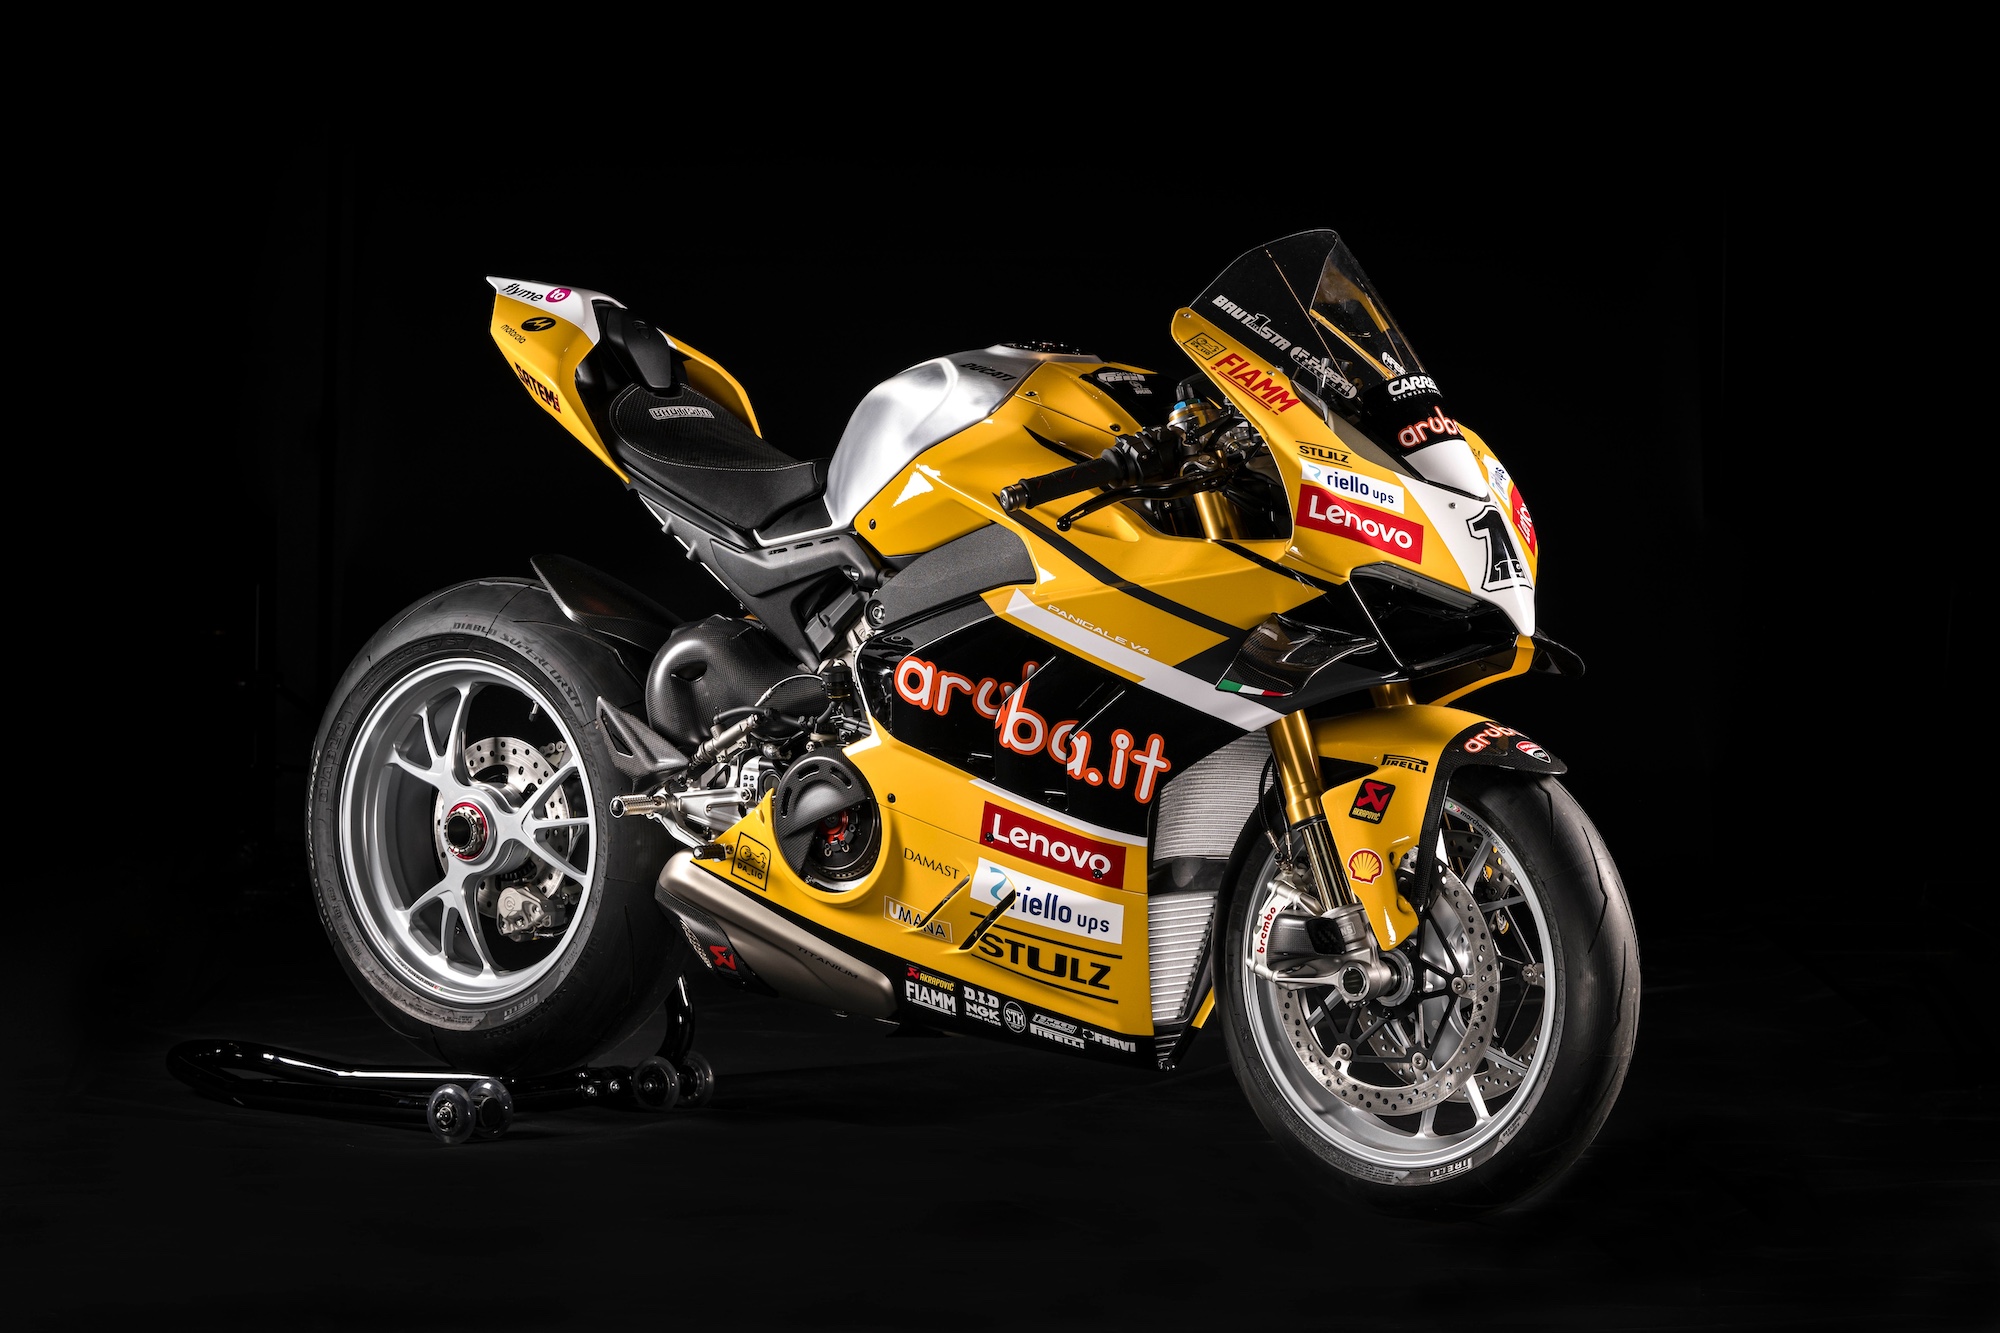 A view of Ducati's Panigale V4 Bautista 2023 World Champion Replica motorcycle.